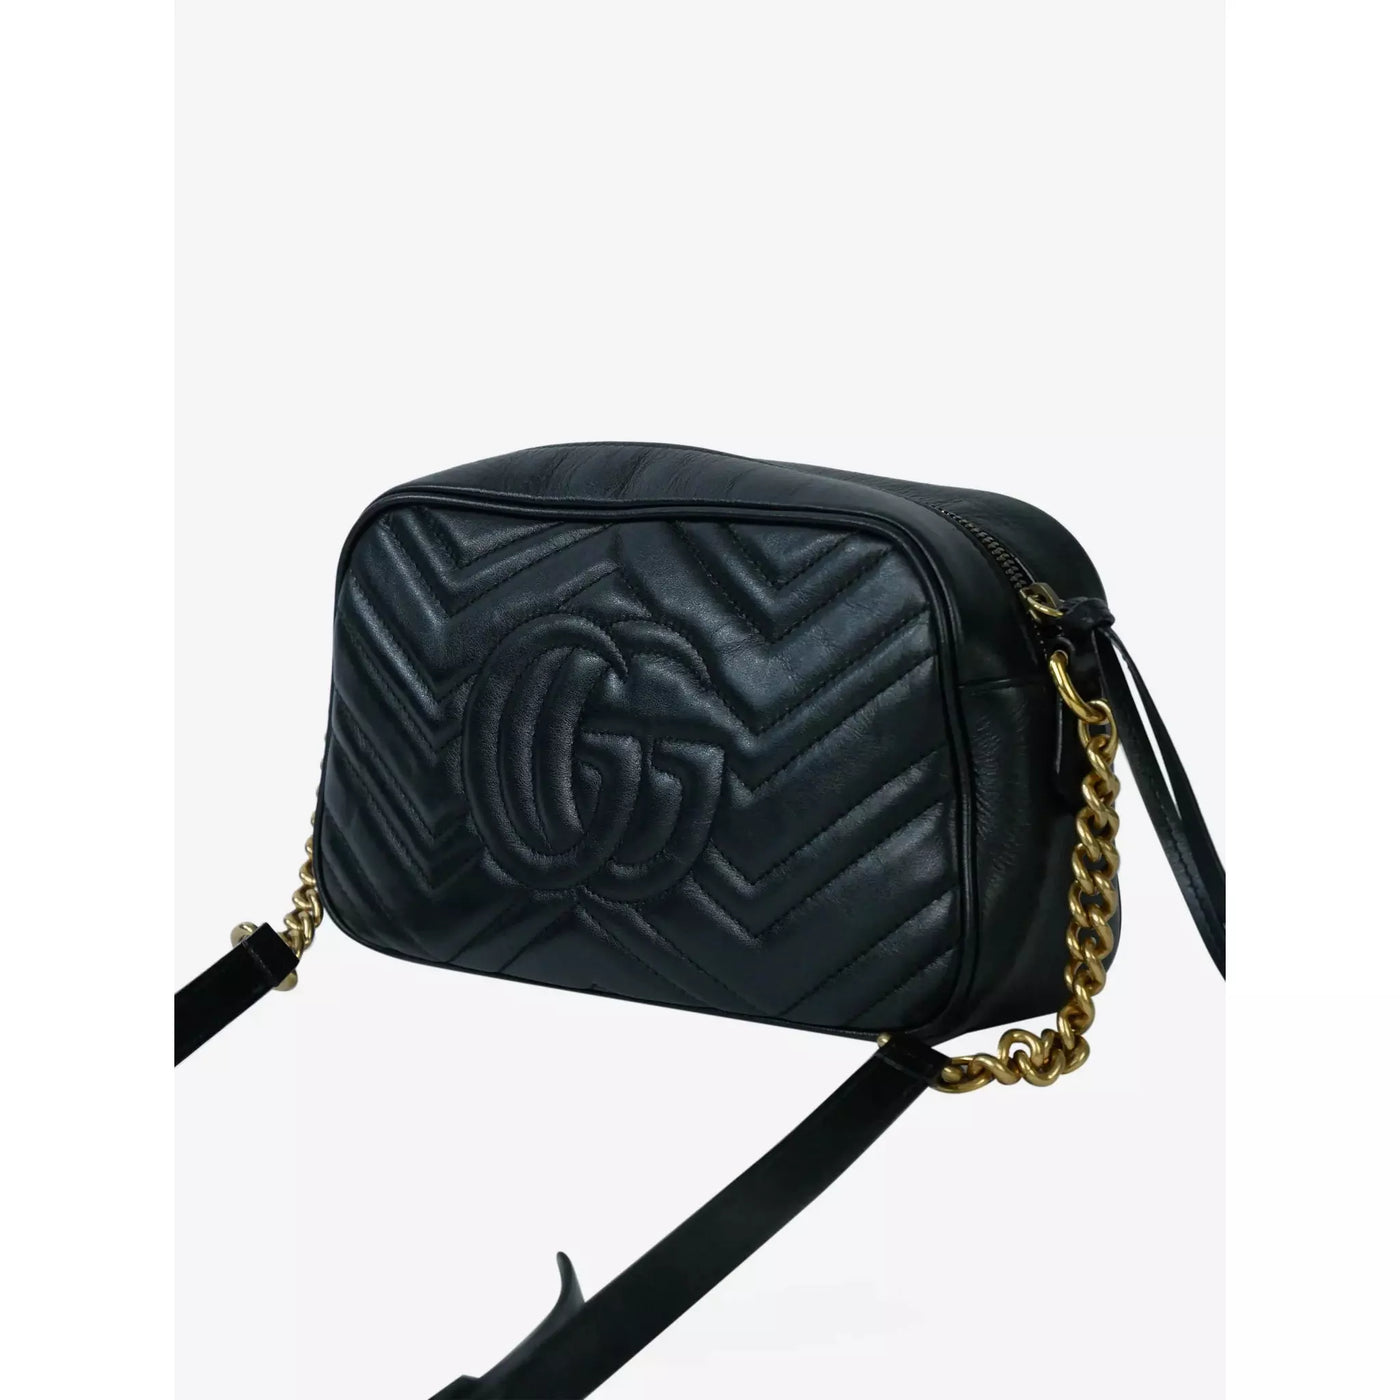 Gucci Black GG Marmont small leather cross-body bag